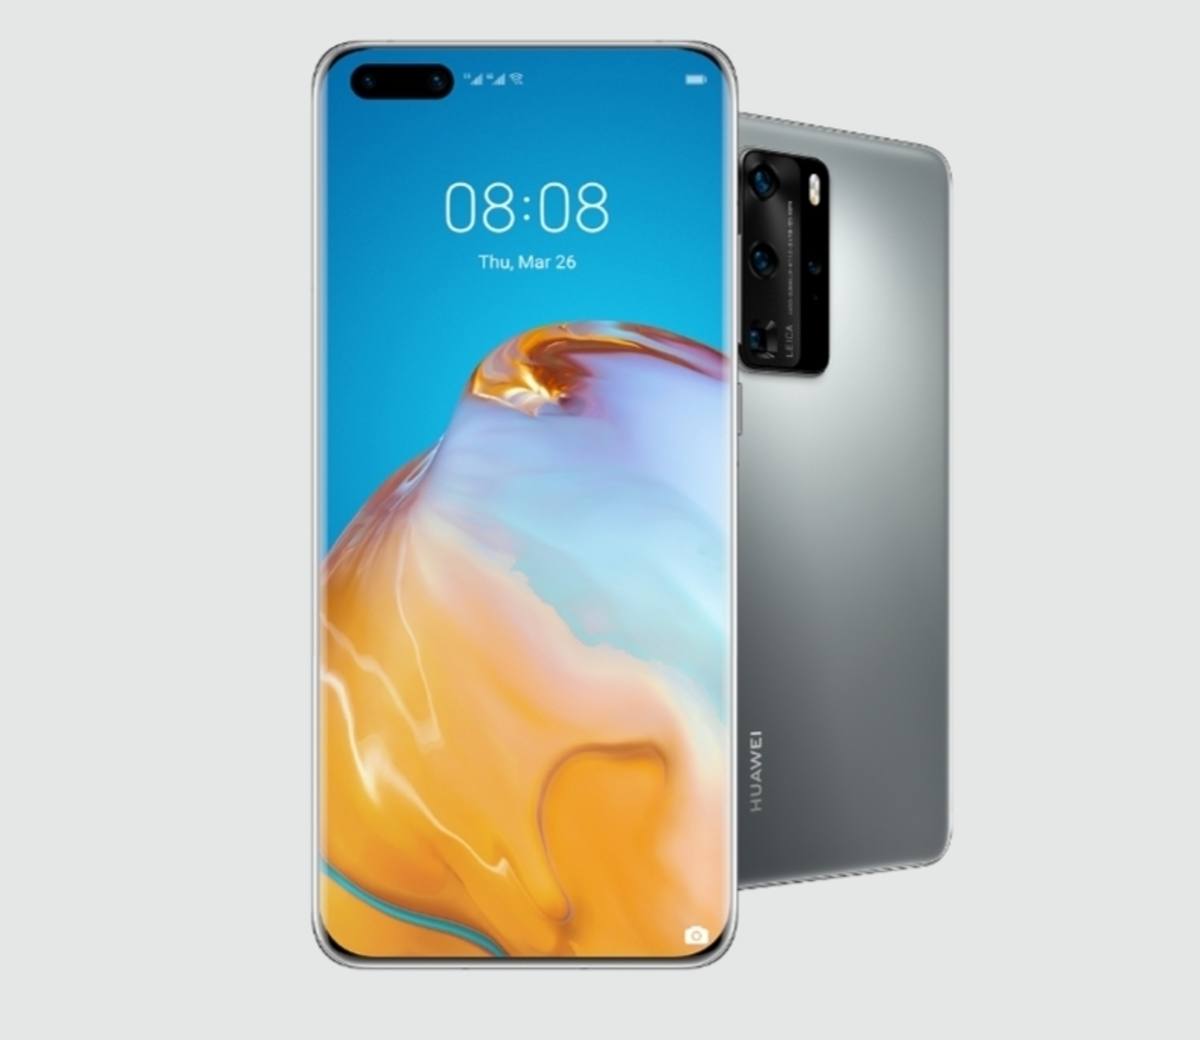 Huawei p40 Pro Price In Nigeria & Mobile Specification